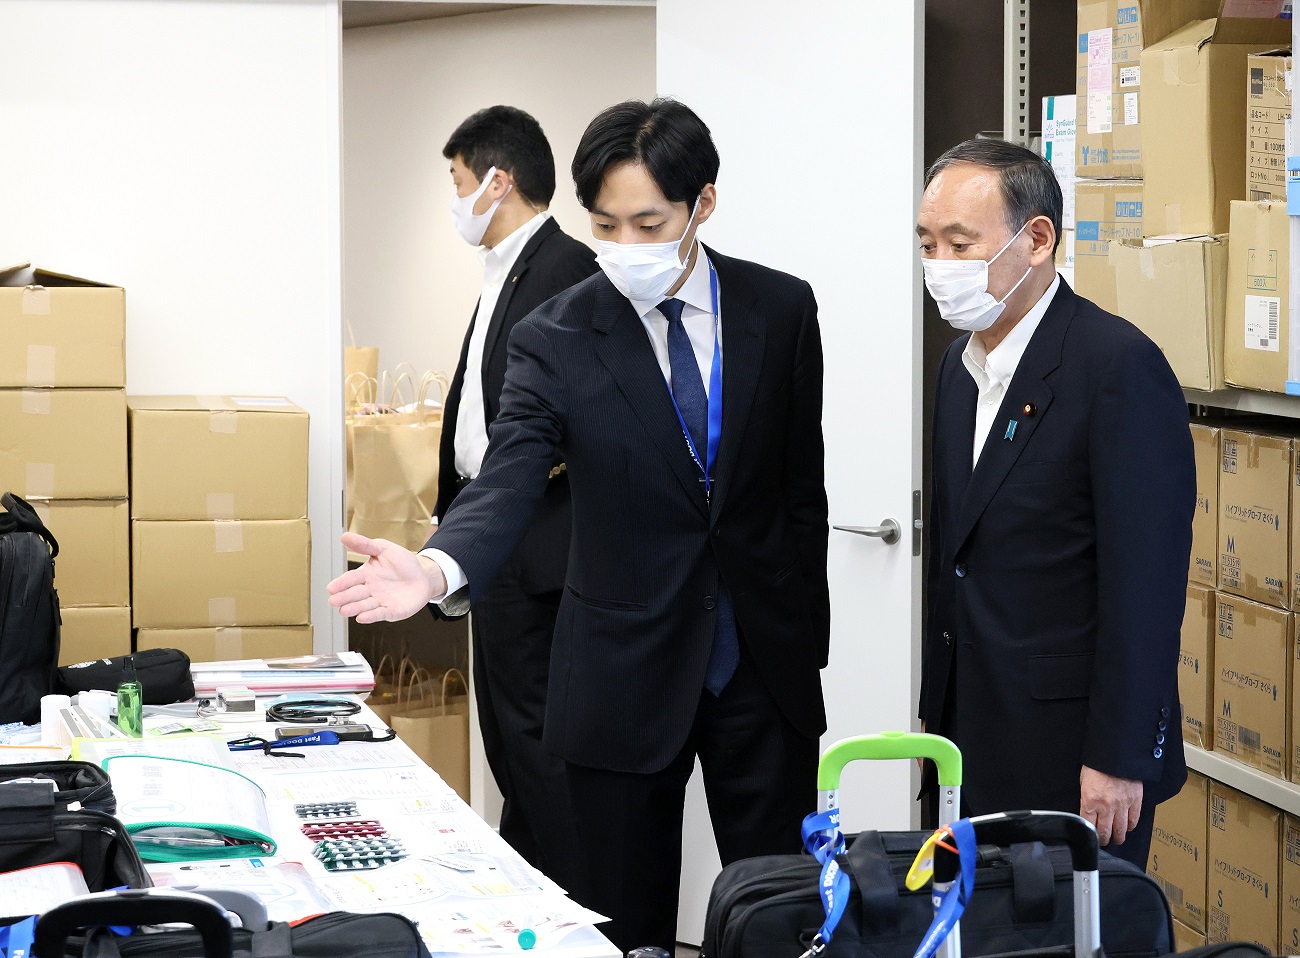 Photograph of the Prime Minister visiting the company (4)